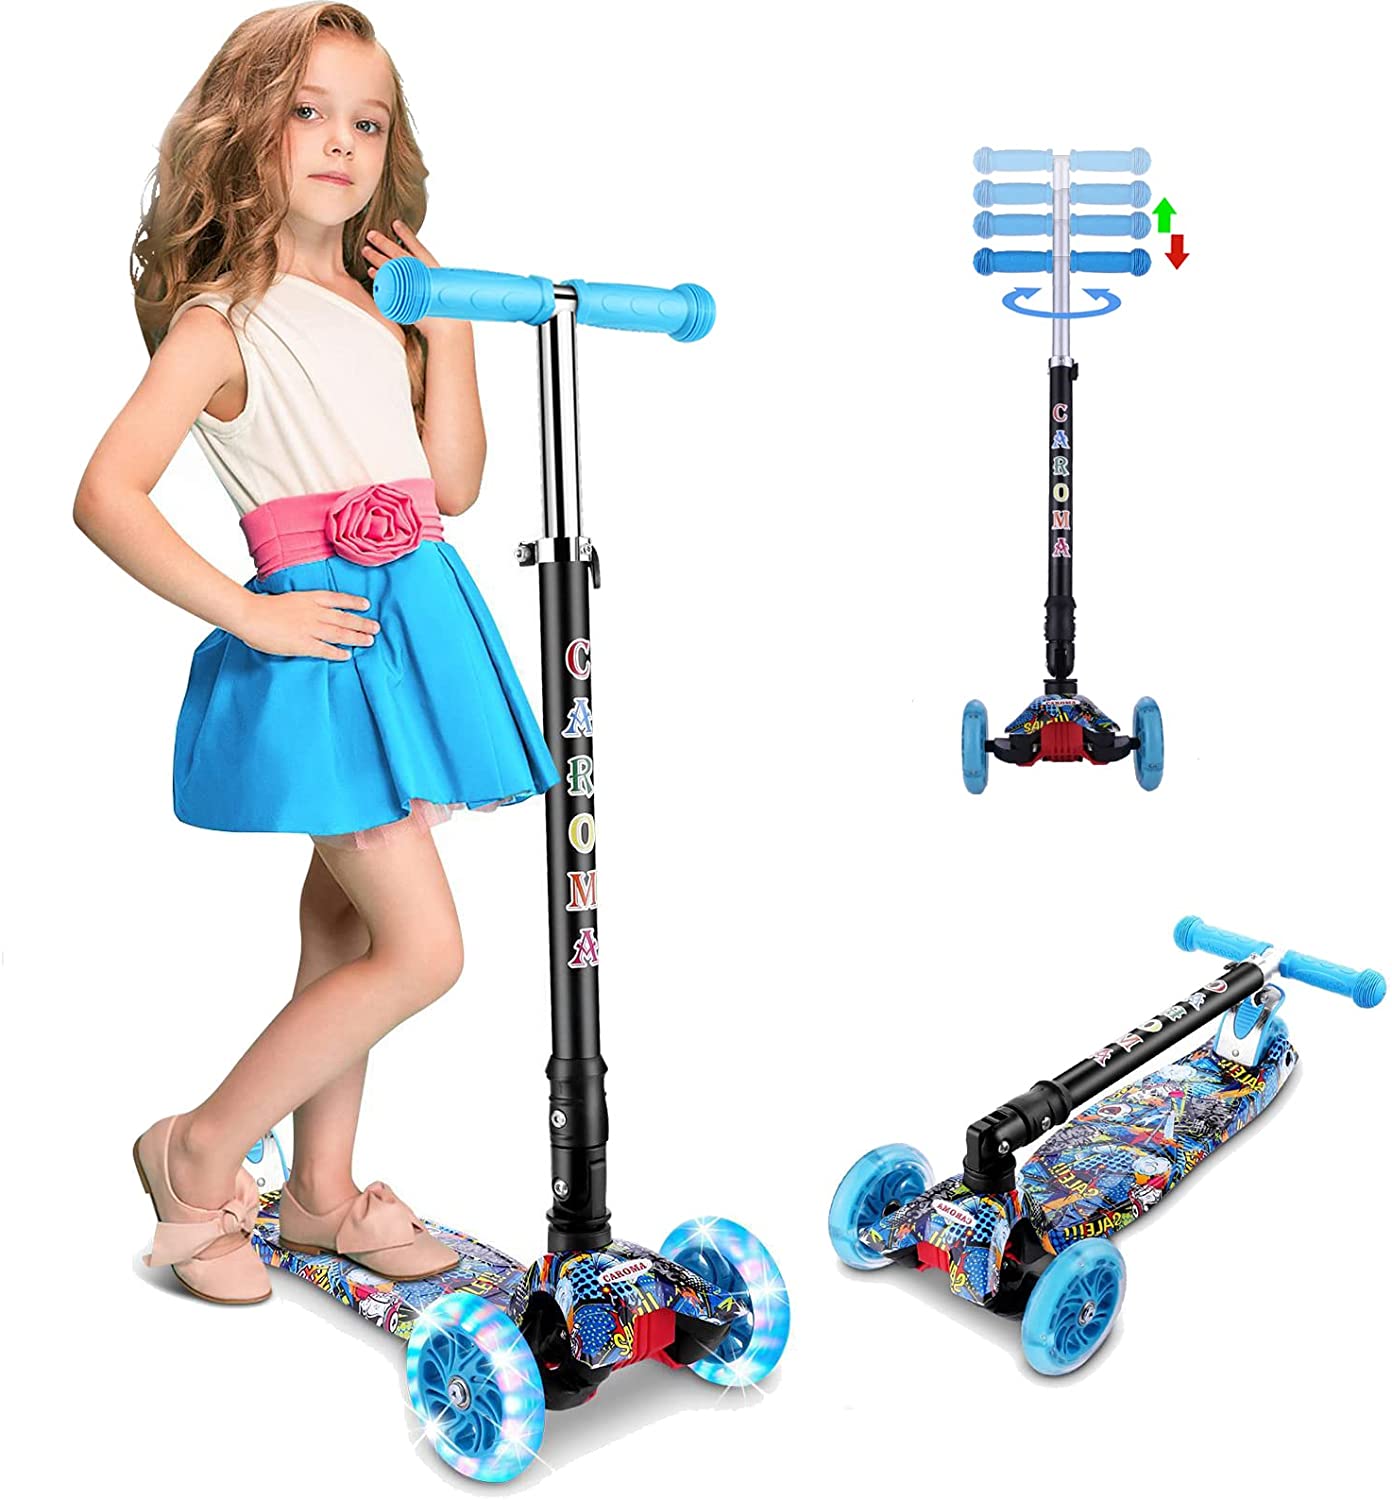 Bearing Capacity 110lb LBLA Kick Scooter with 3 LED Light-Up Wheels for Toddlers 3-8 Year-Old,4 Adjustable Handlebar,Lean to Steer with Extra-Wide Deck,Folding Graffiti Scooter with Musical 